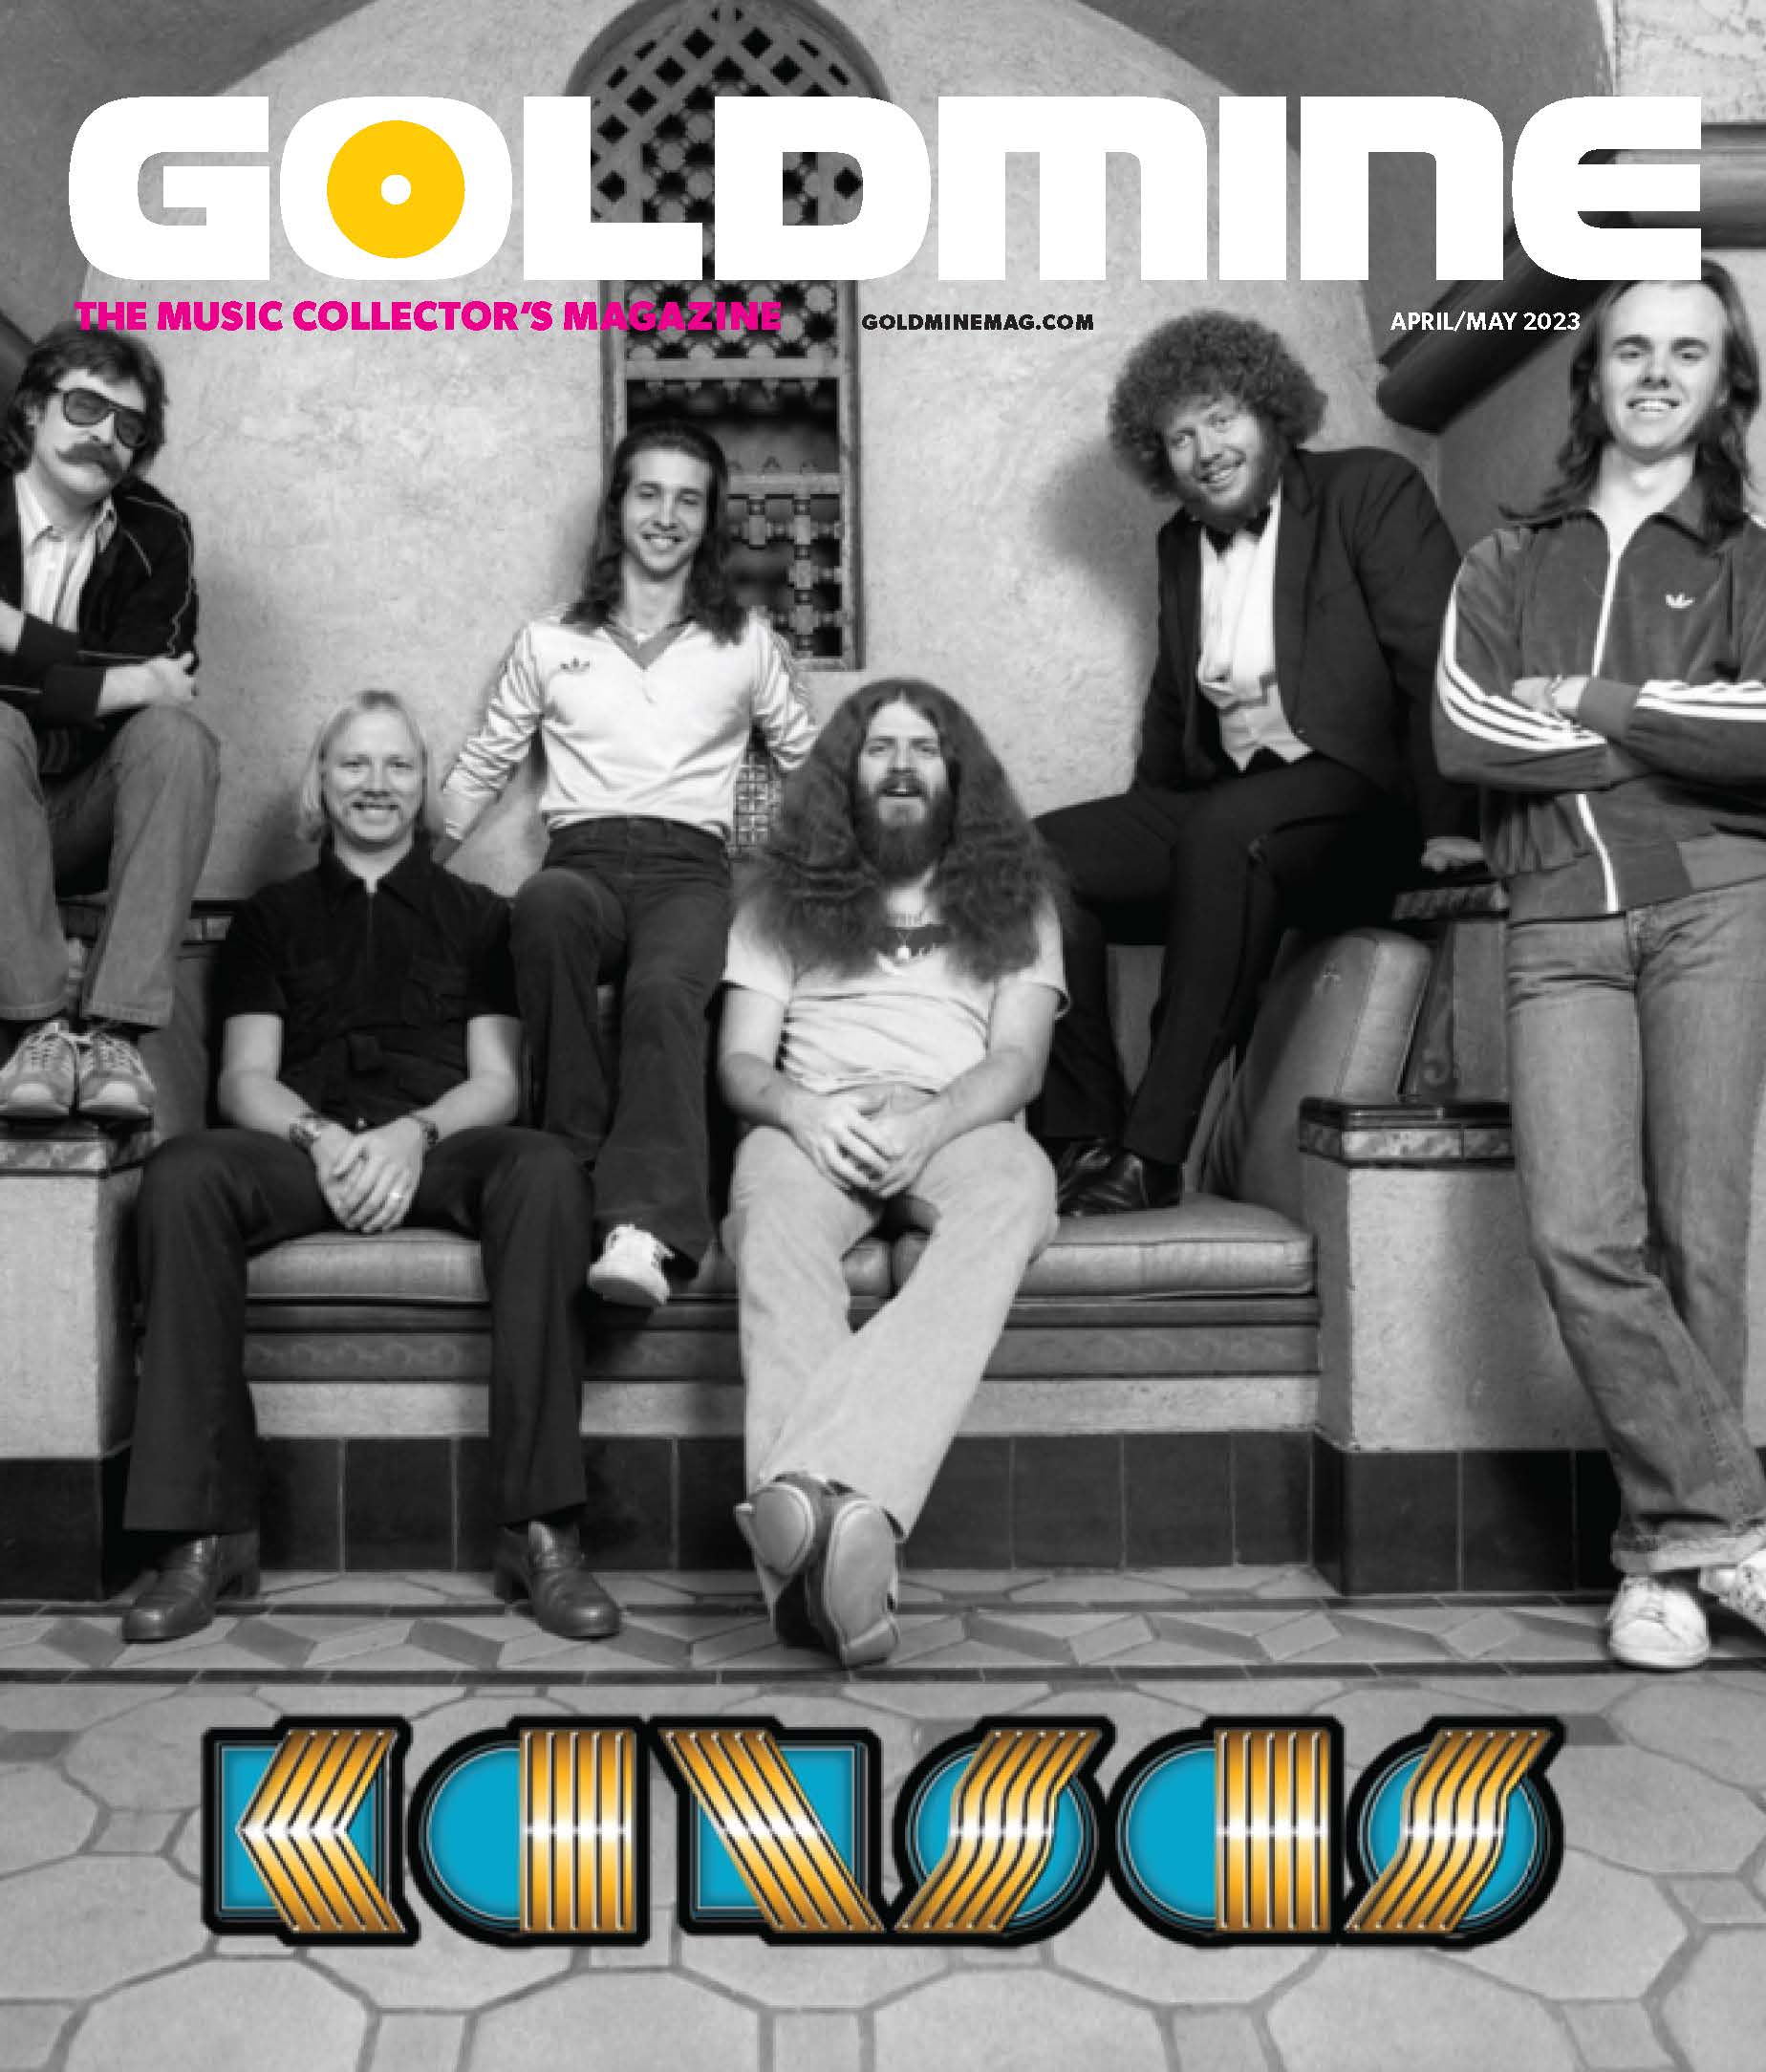 GOLDMINE MAGAZINE: APRIL/MAY 2023 ISSUE FEATURING KANSAS ALT COVER HAND-NUMBERED SLIPCASE + SIGNED PRINT